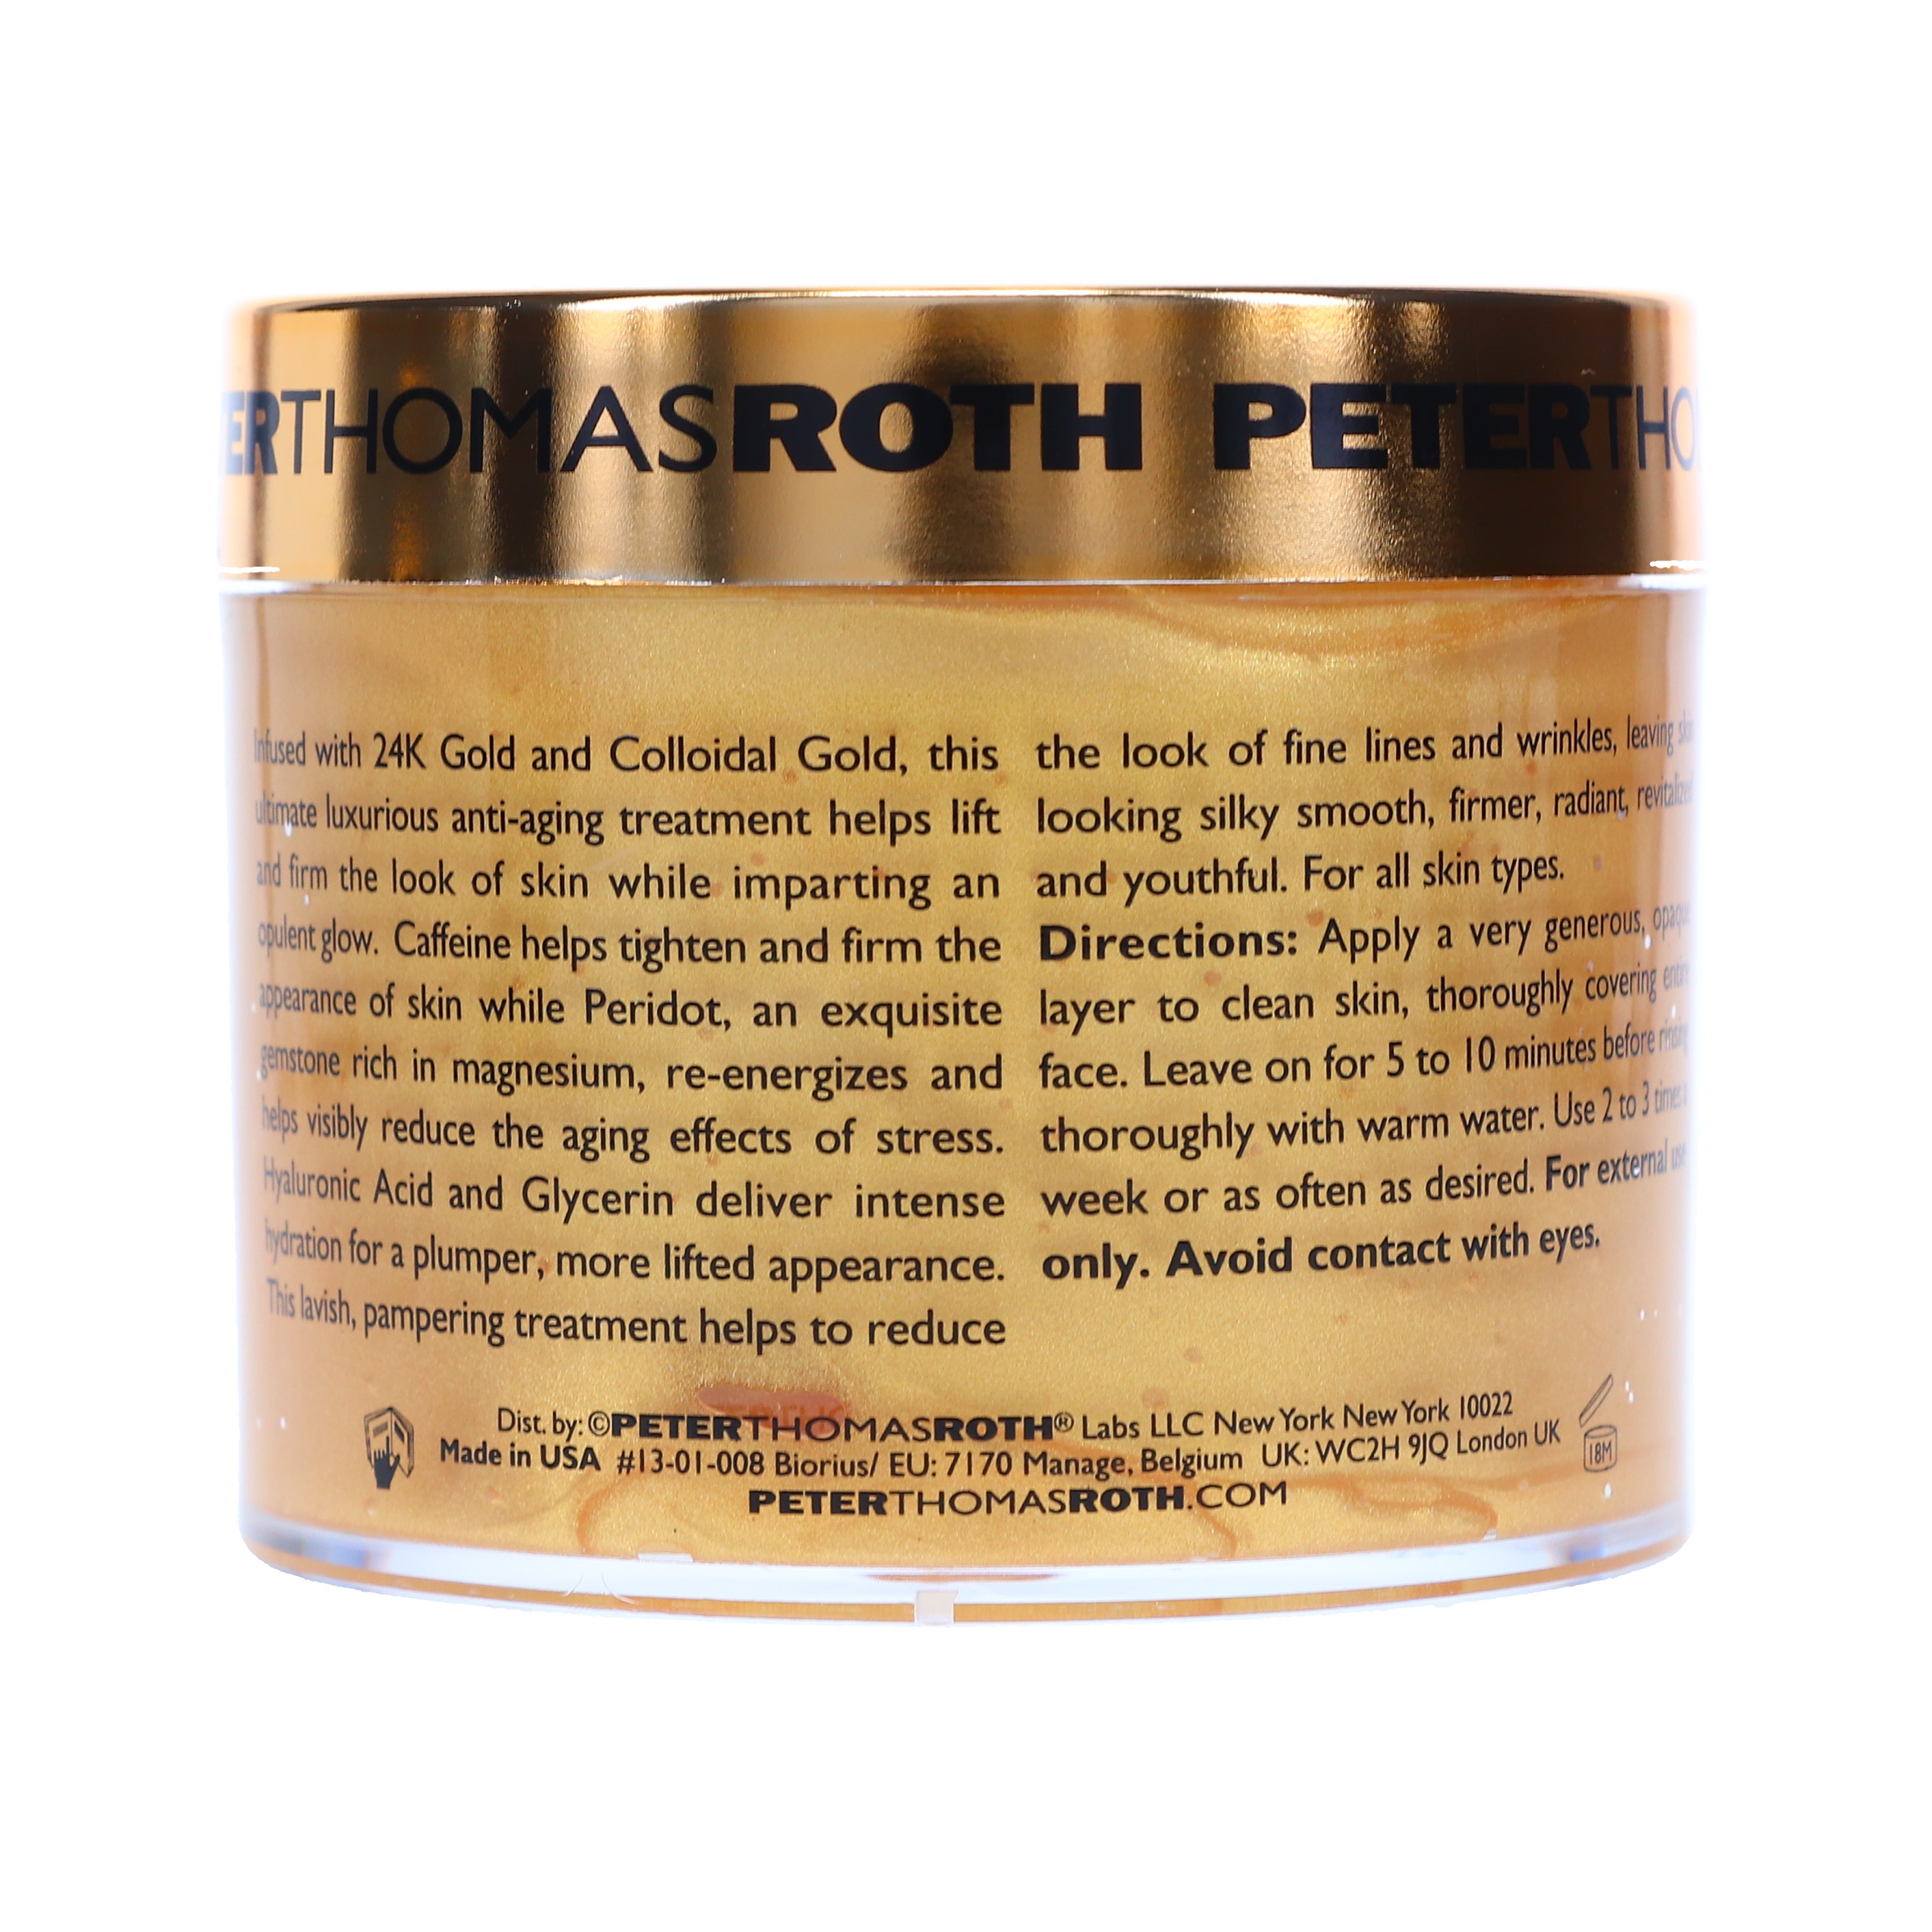 Peter Thomas Roth 24K Gold Mask Pure Luxury Lift & Firm Mask 5.1 oz - image 4 of 8